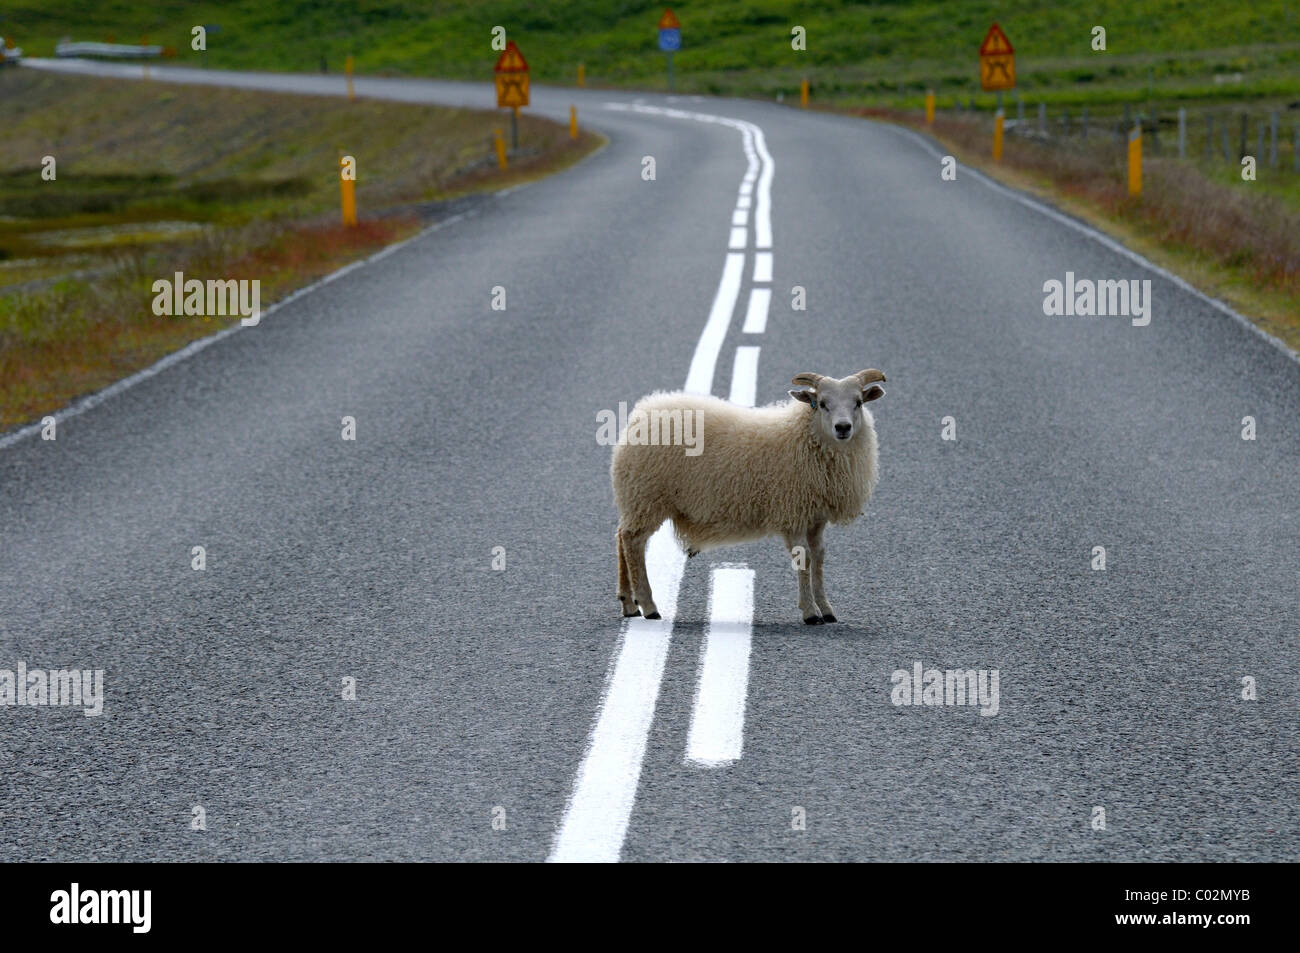 Sheep standing in the middle of a road, Iceland, Europe Stock Photo